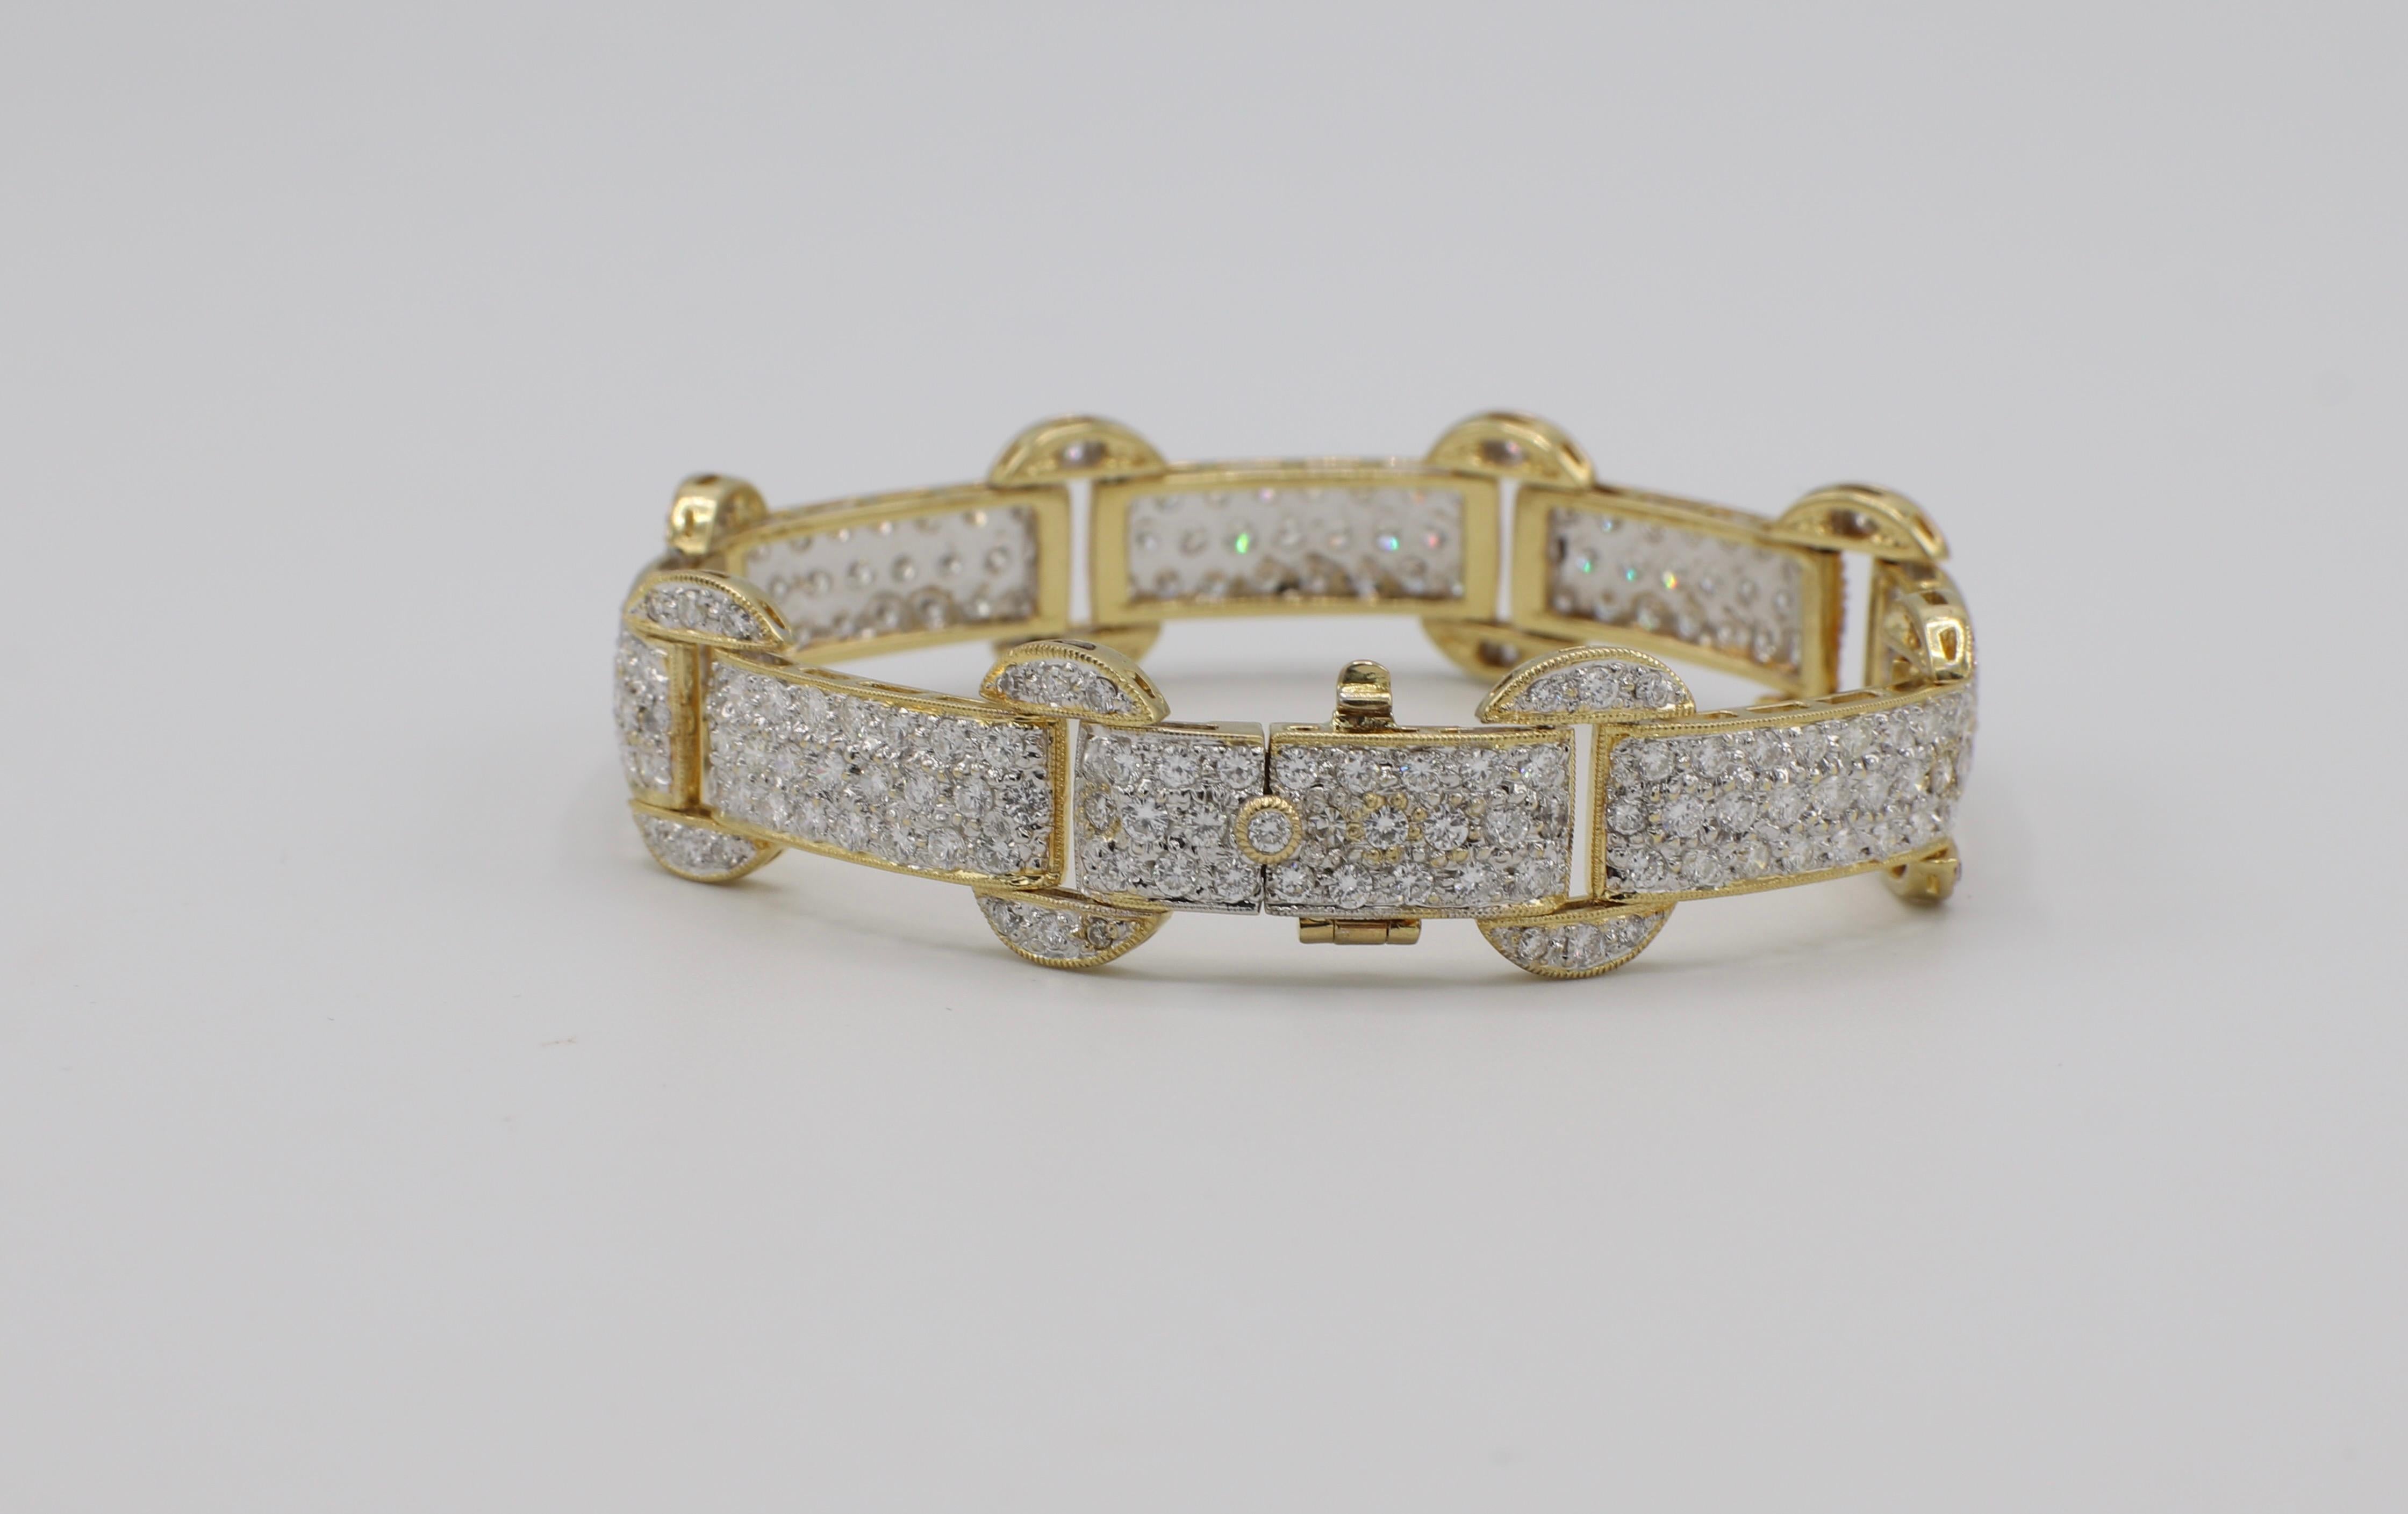 18 Karat Yellow Gold 7 Carat Pave Diamond Bracelet 6.75 Inches
Metal: 18k yellow gold
Weight: 25.11 grams
Diamonds: Approx. 7 CTW F-G VS 
Length: 6.75 inches
Width: 7.5 - 13.3MM
